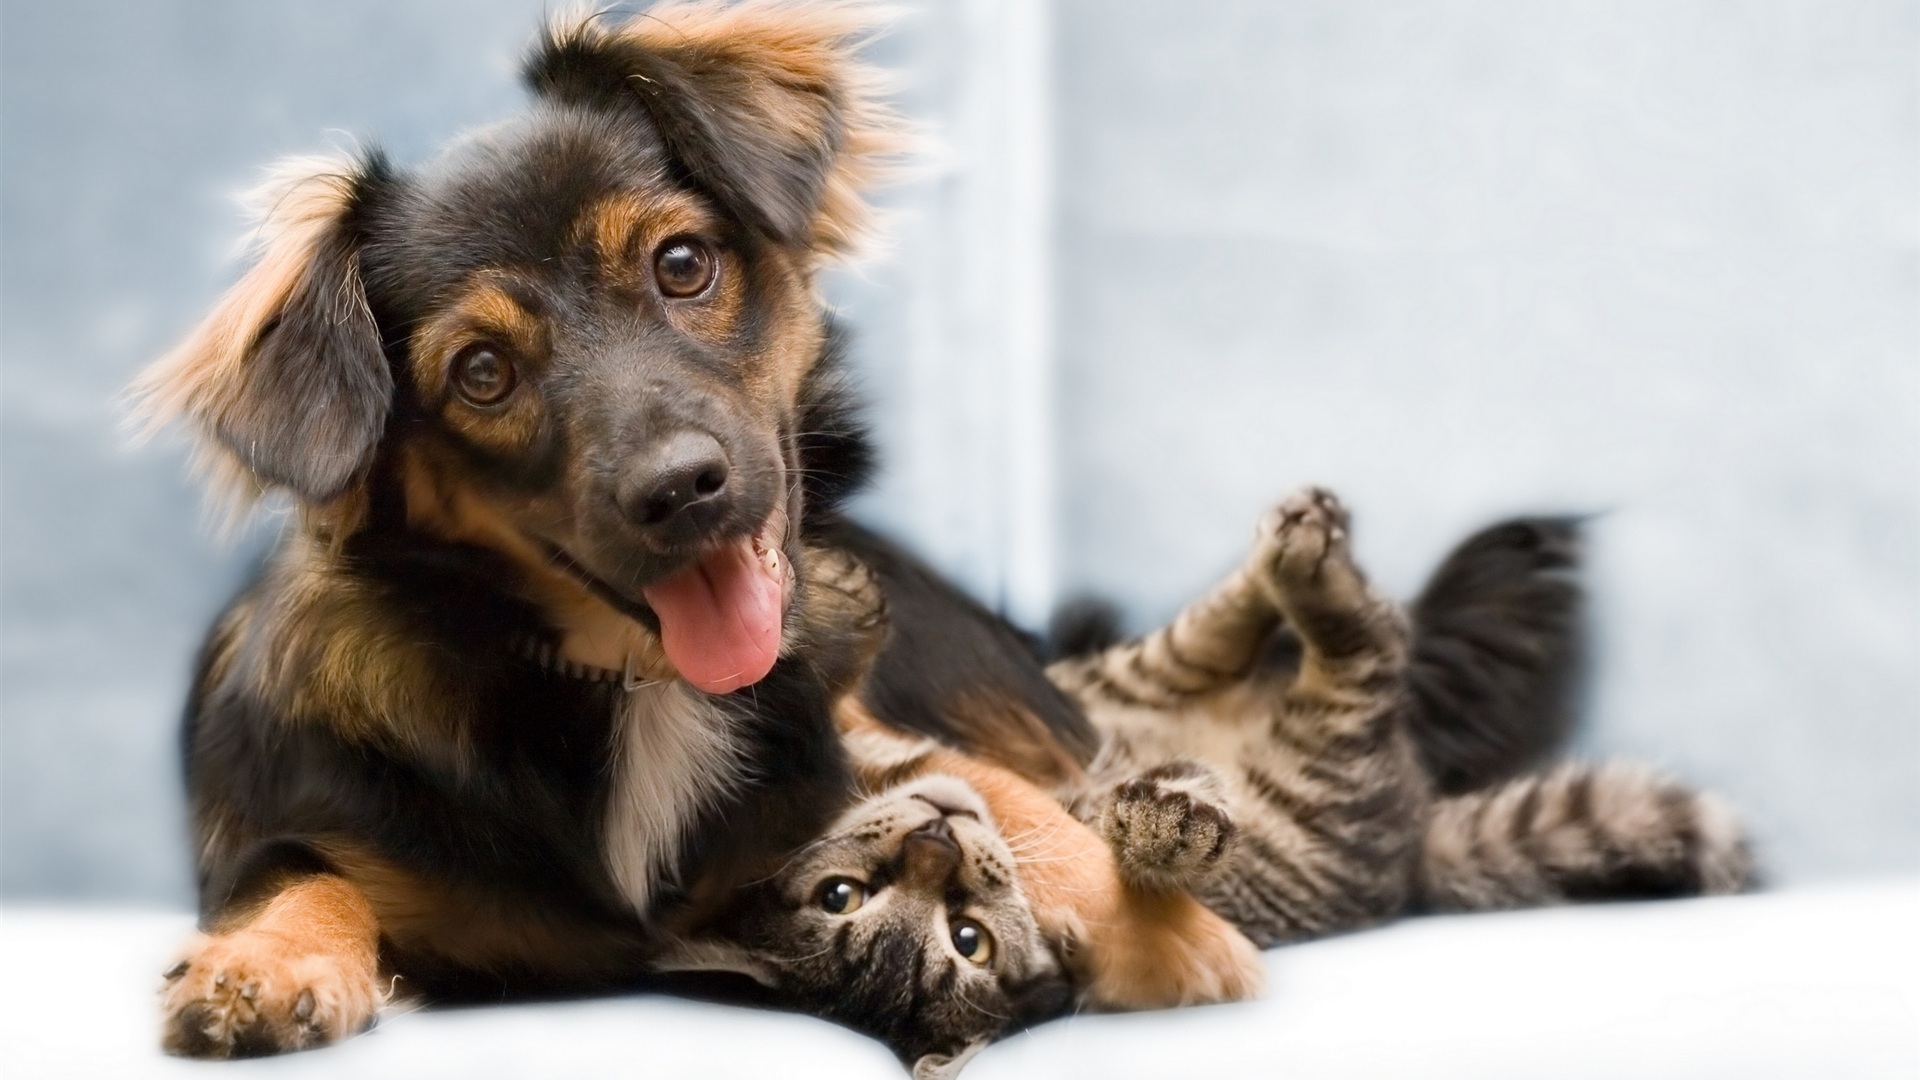 Cats And Dogs Friendship Desktop Wallpaper Suit Up